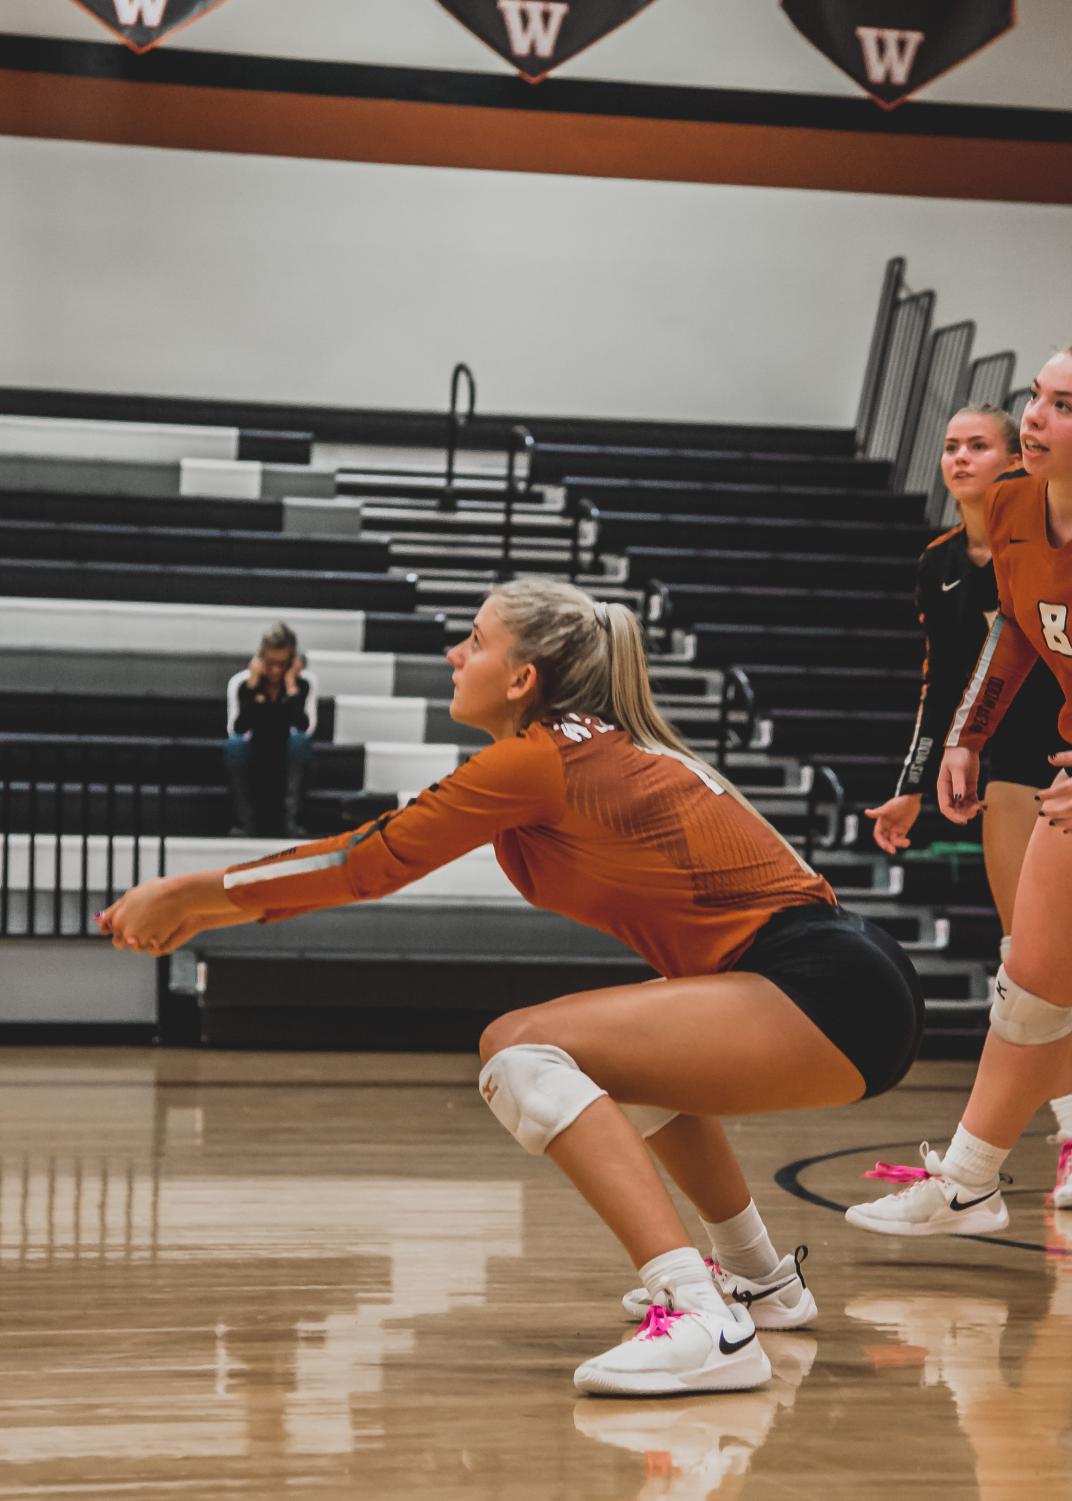 Varsity+Volleyball+Falls+To+Vandegrift+3-0+on+Parent+Night%2C+Homecoming+Game